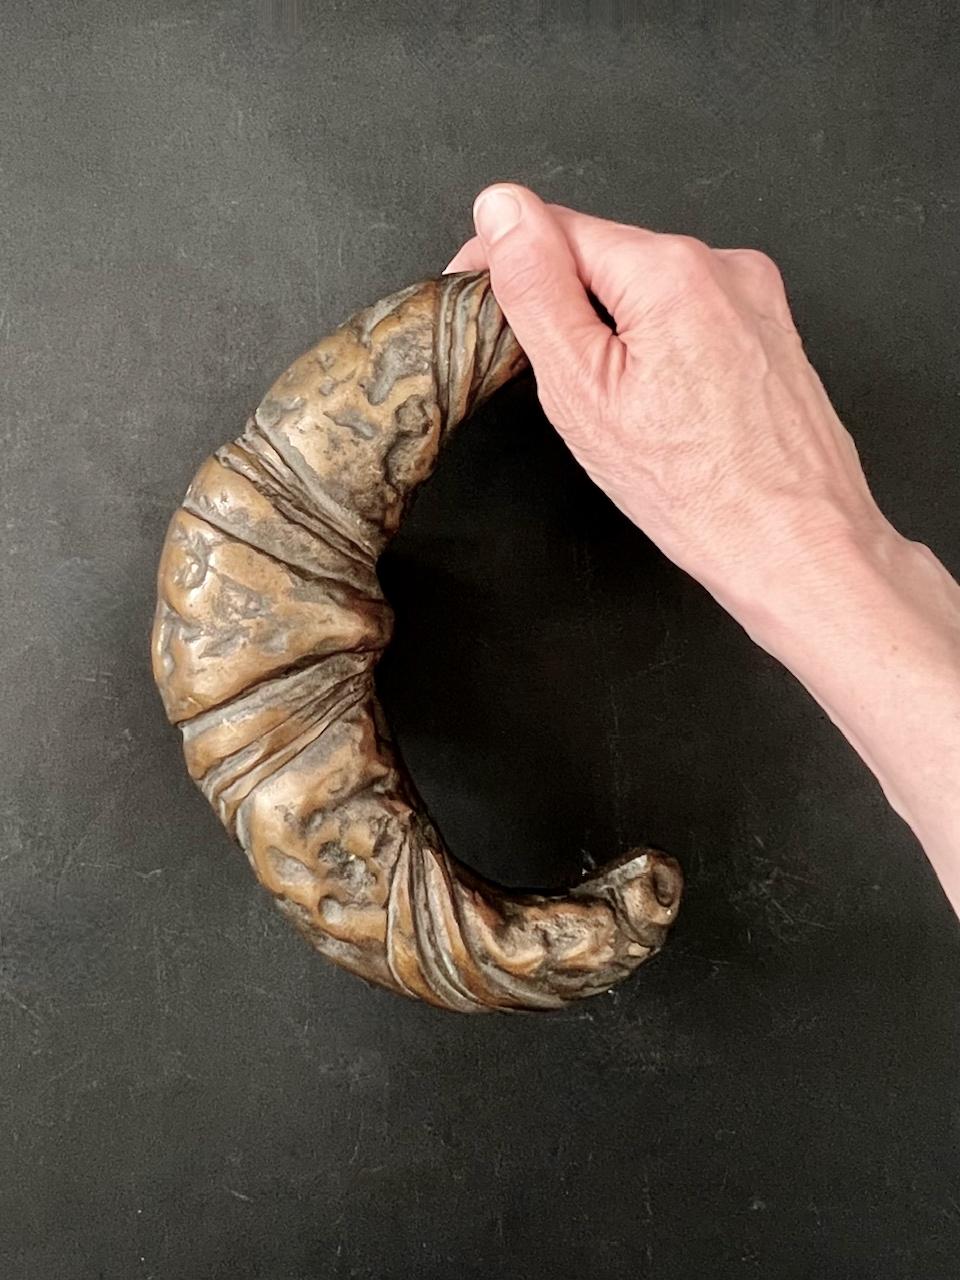 Large and heavy cast bronze door handle in the shape of a croissant. Wonderful for your bakery, patisserie, coffee shop, café or kitchen. Mid to late 20th century, European. Good vintage condition with minor signs of wear in line with age and